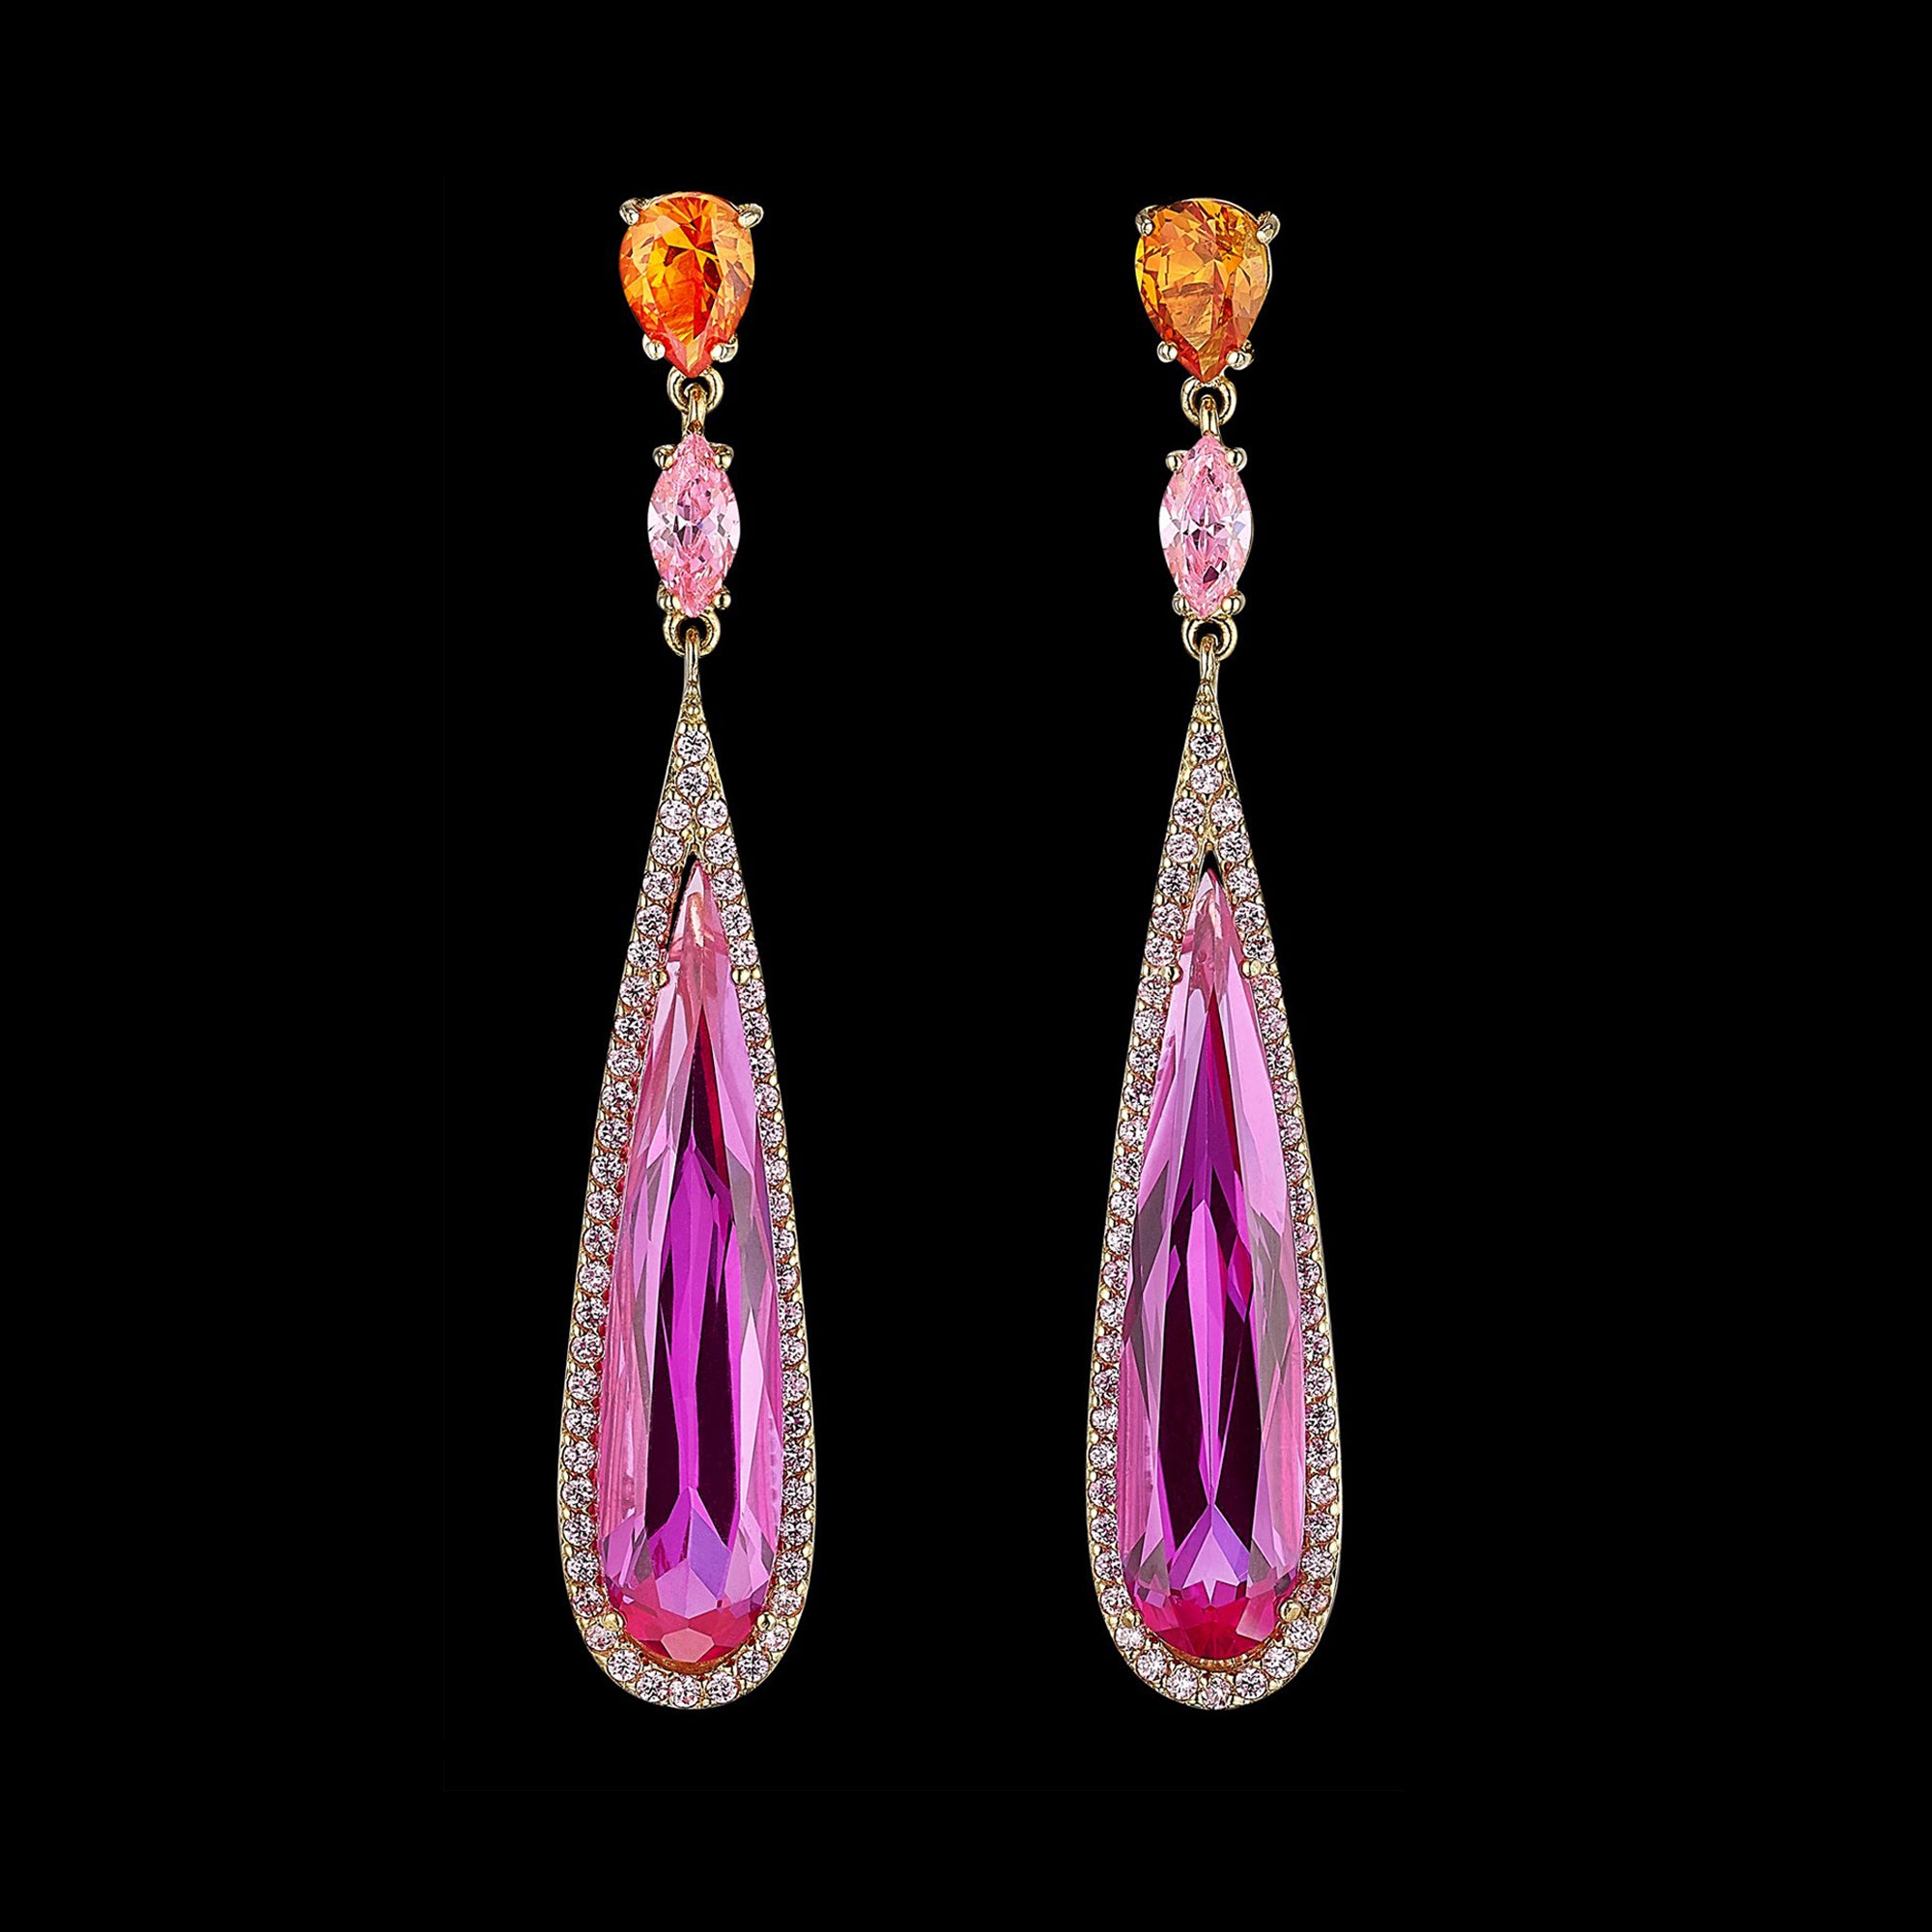 Fuchsia Shard Earrings, Earring, Anabela Chan Joaillerie - Fine jewelry with laboratory grown and created gemstones hand-crafted in the United Kingdom. Anabela Chan Joaillerie is the first fine jewellery brand in the world to champion laboratory-grown and created gemstones with high jewellery design, artisanal craftsmanship and a focus on ethical and sustainable innovations.